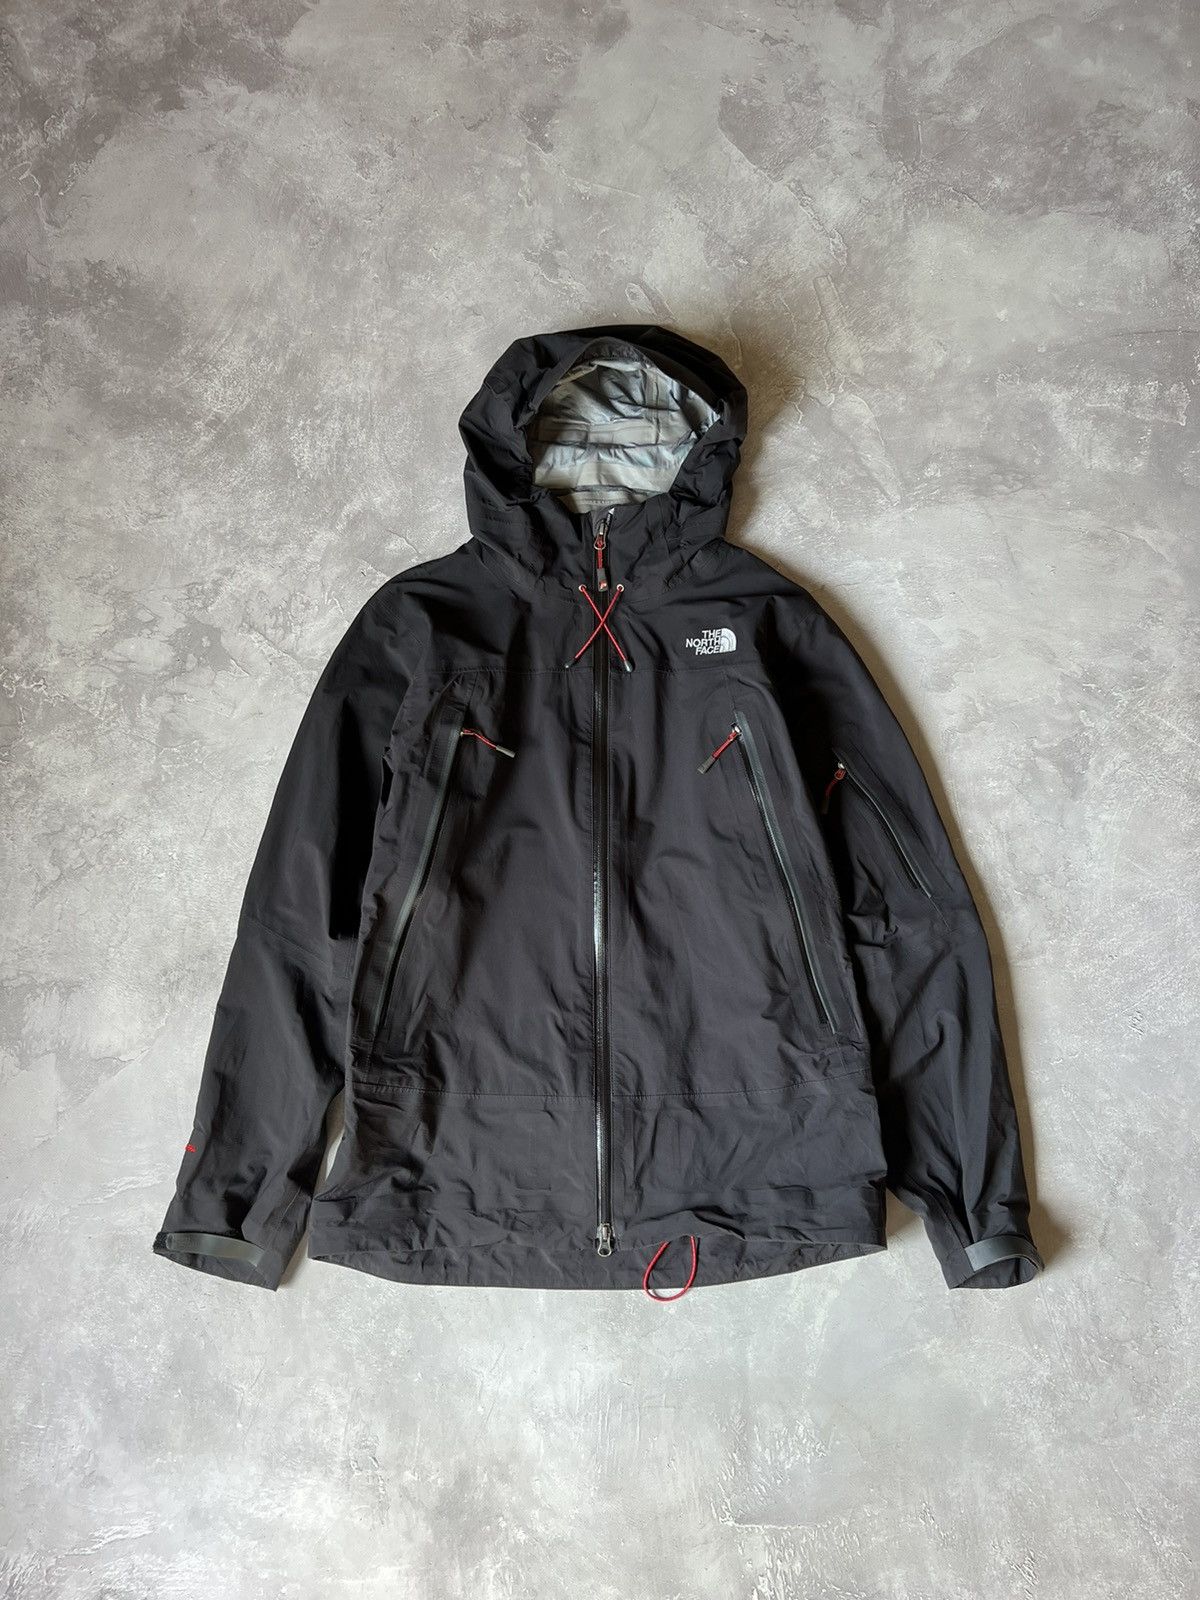 North Face Summit Series Hyvent Alpha Jacket | Grailed